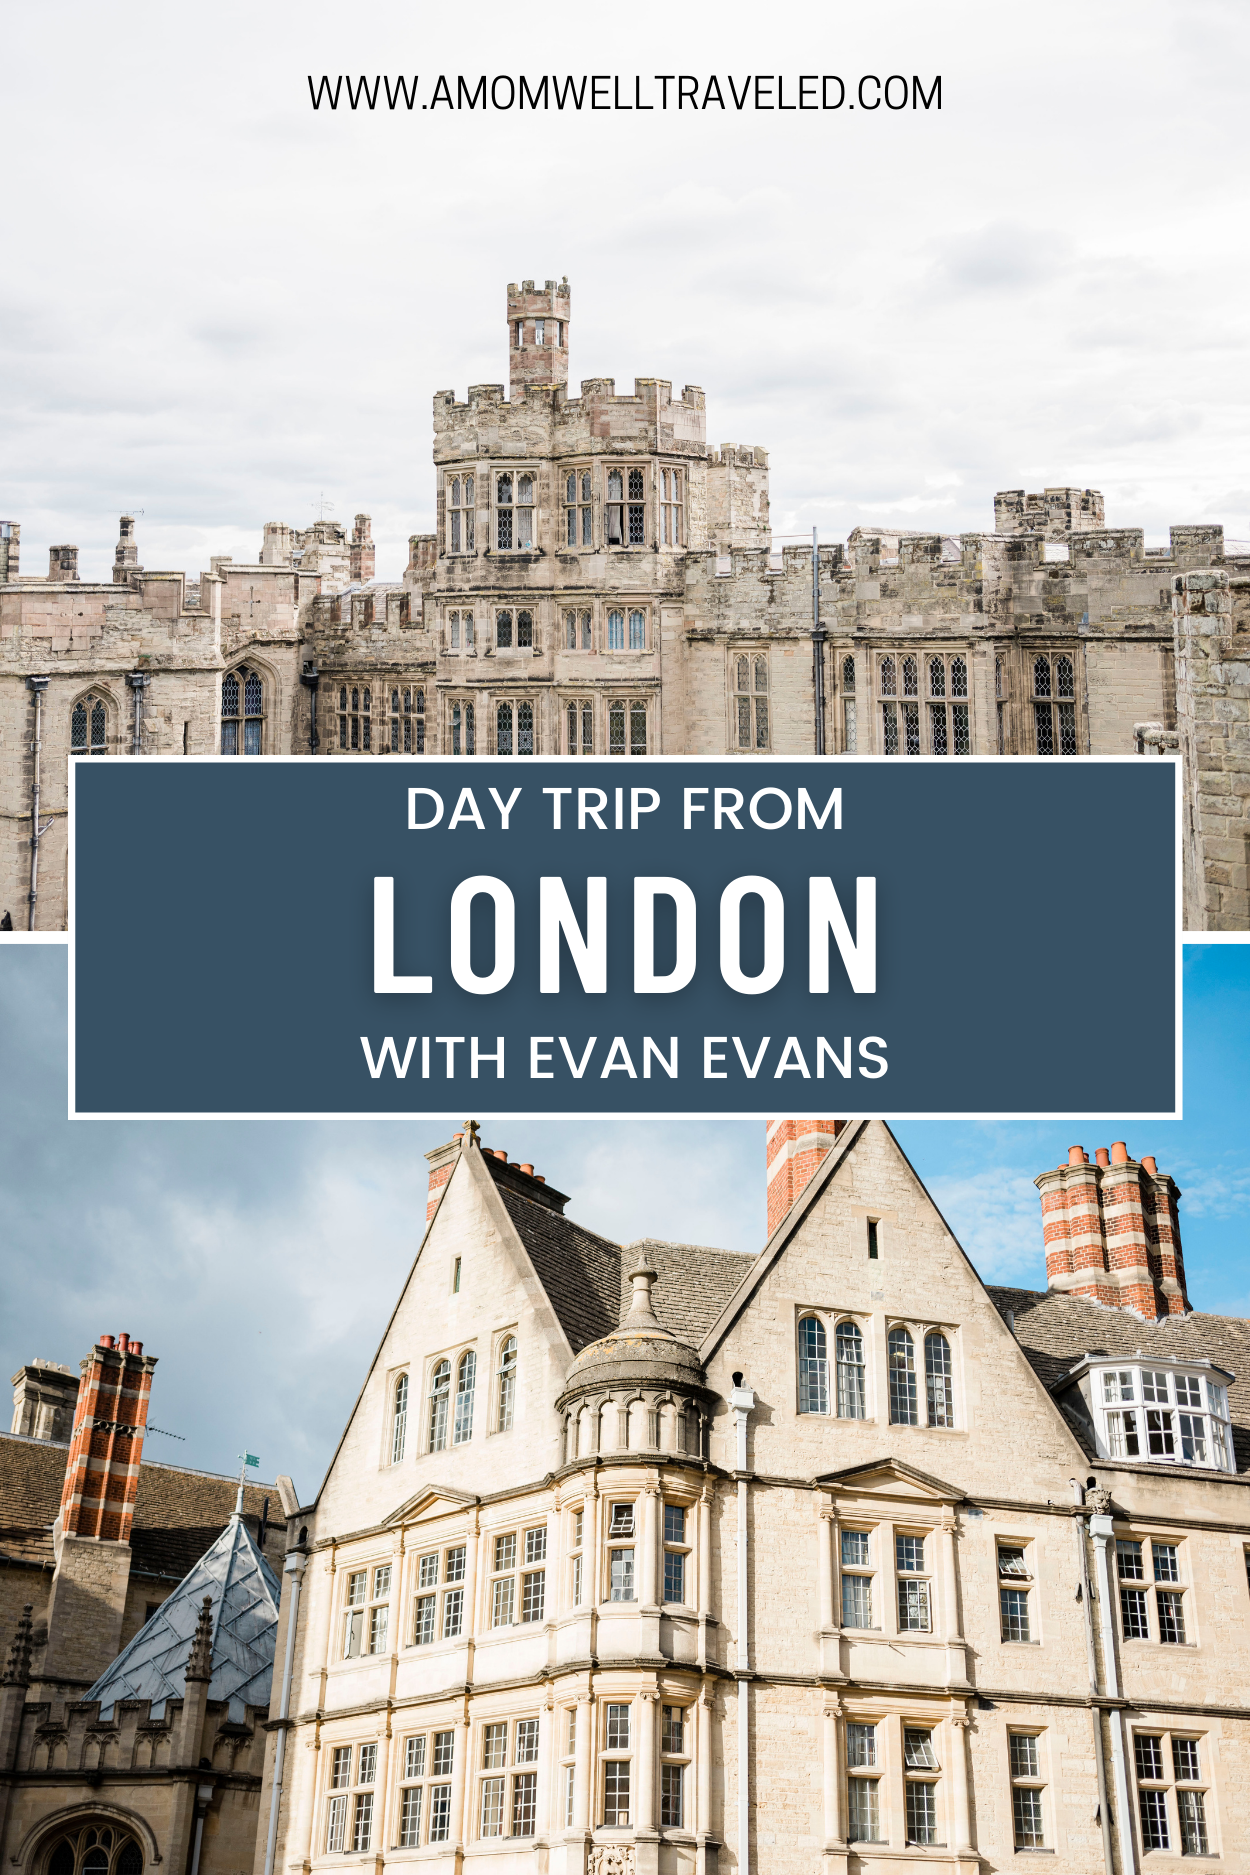 Day trip from London with Evan Evans to Oxford, Warwick Castle, Cotswolds 